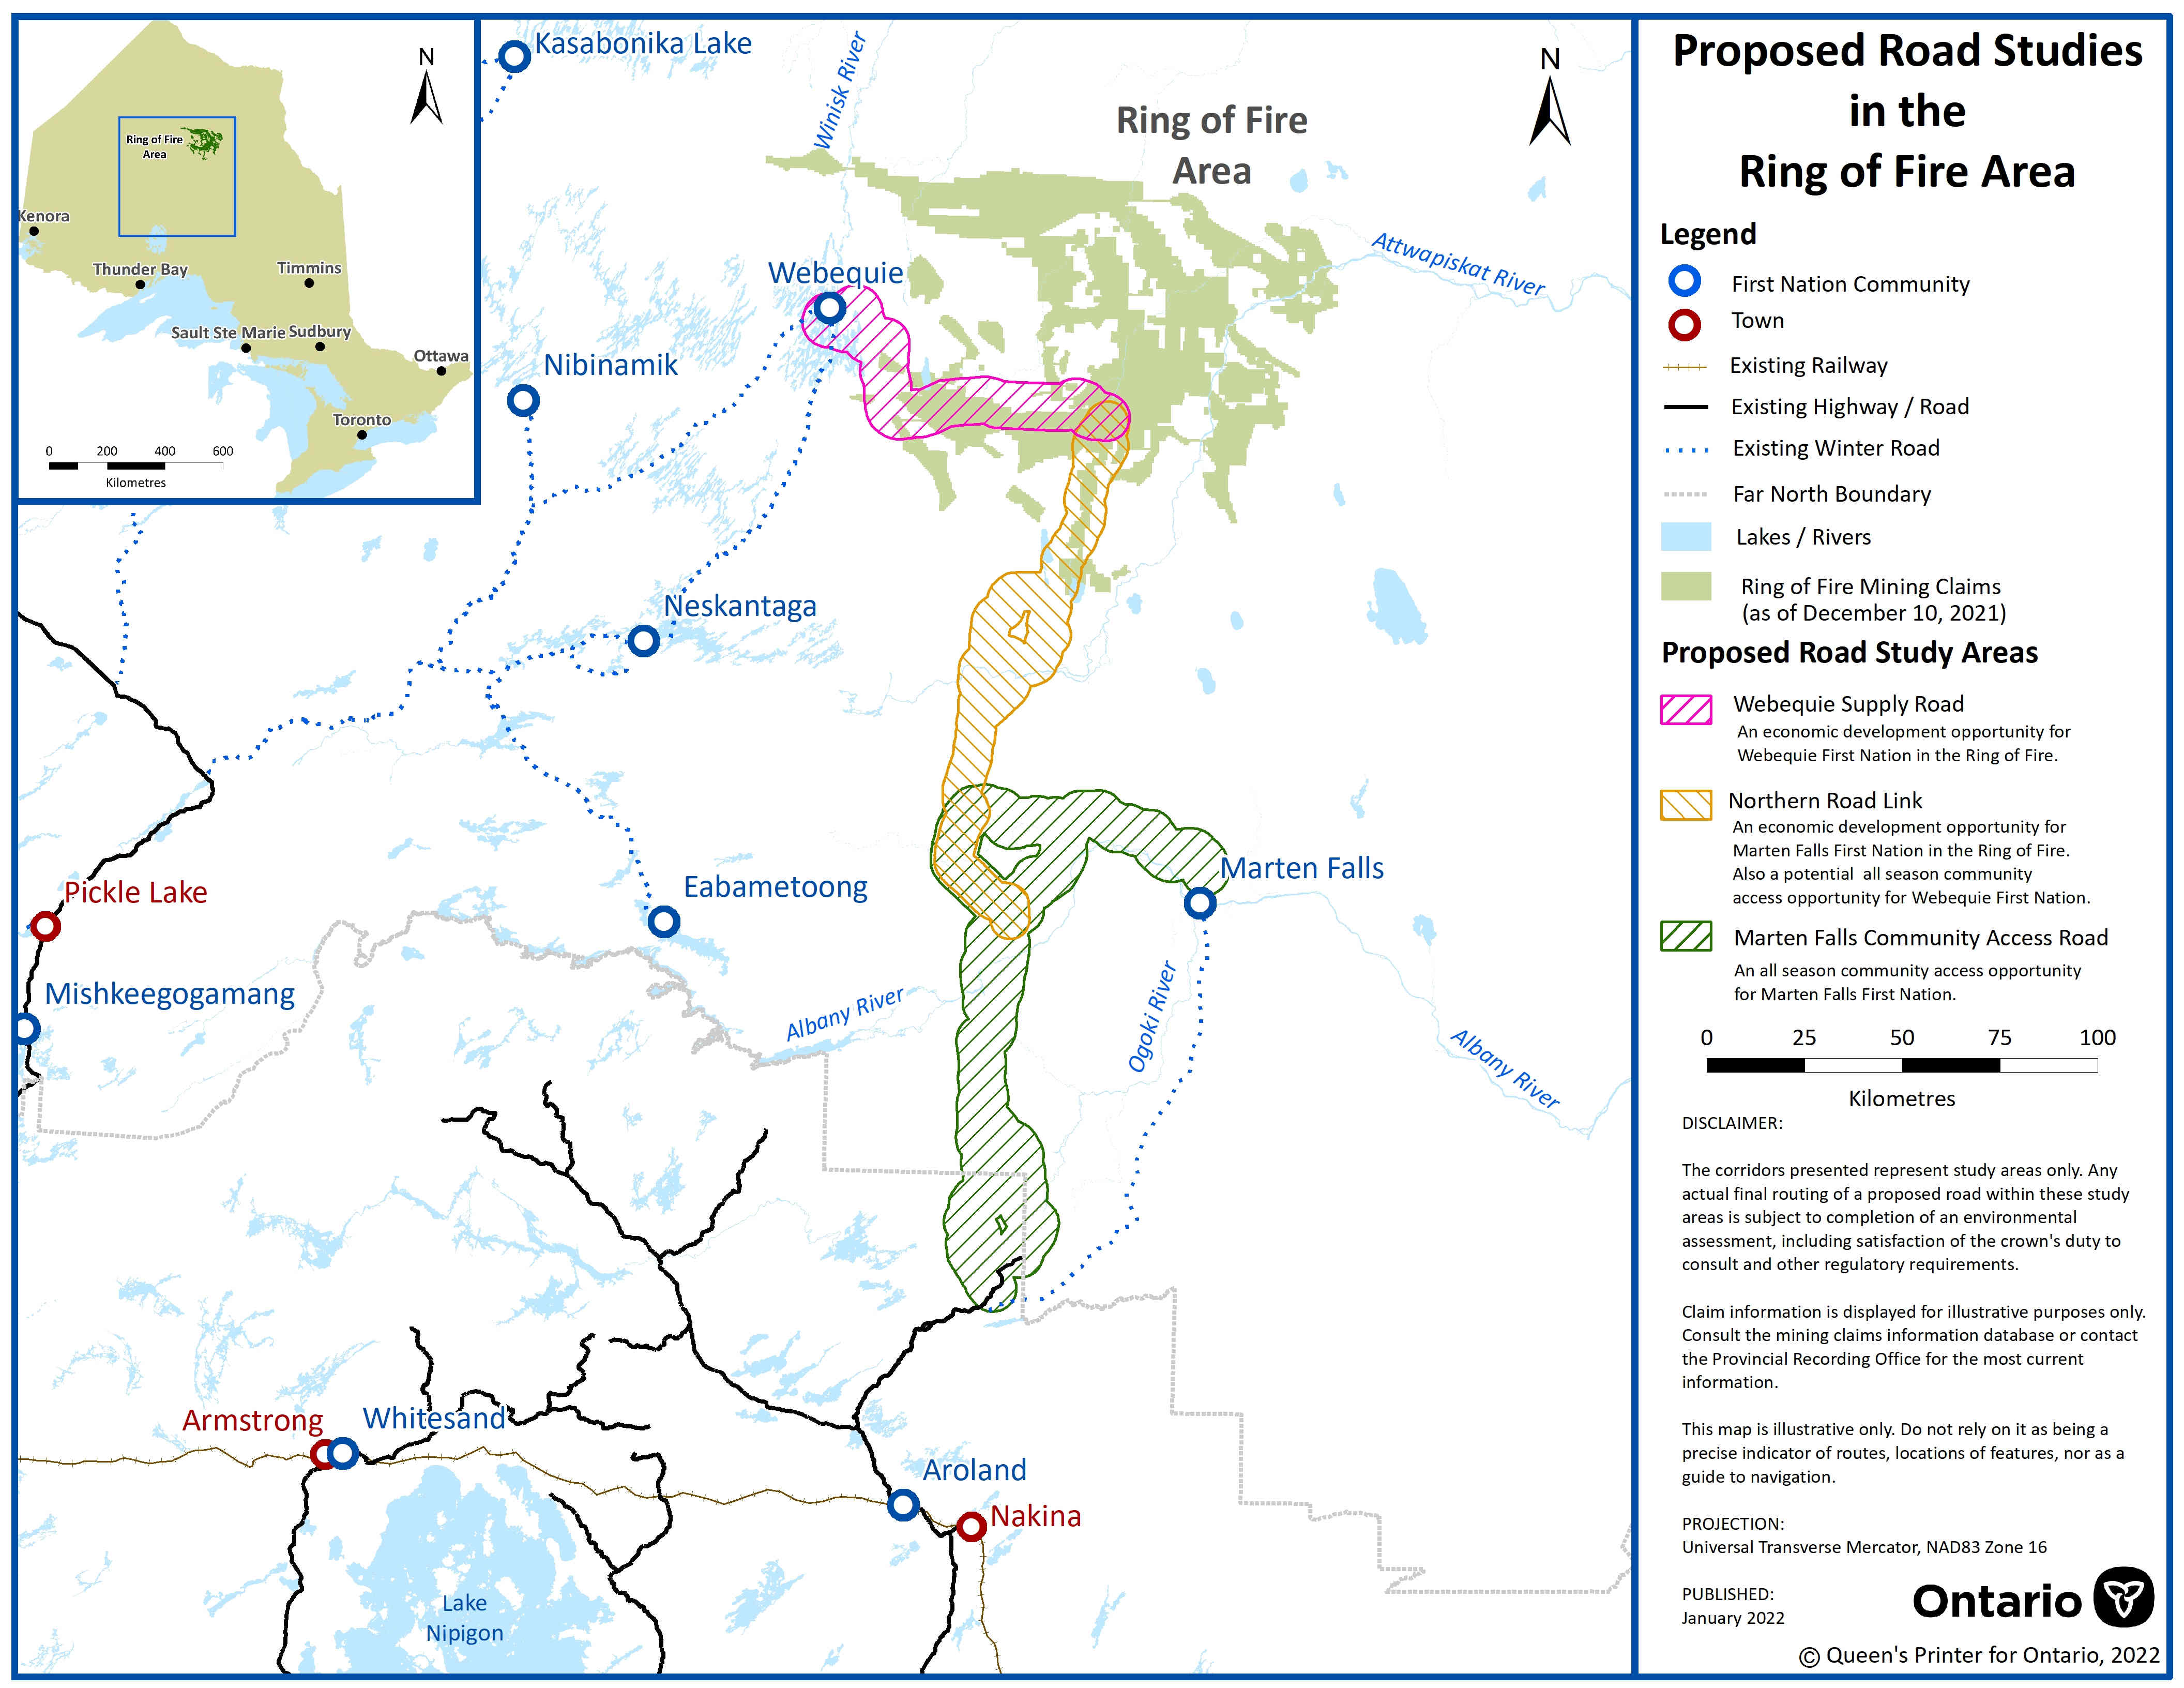 Map of three proposed road environmental assessment study areas in the Ring of Fire area. Includes the Webequie Supply Road Project represented by pink diagonal lines, the Northern Road Link Project represented by yellow diagonal lines and the Marten Falls Community Access Road Project represented by green diagonal lines.